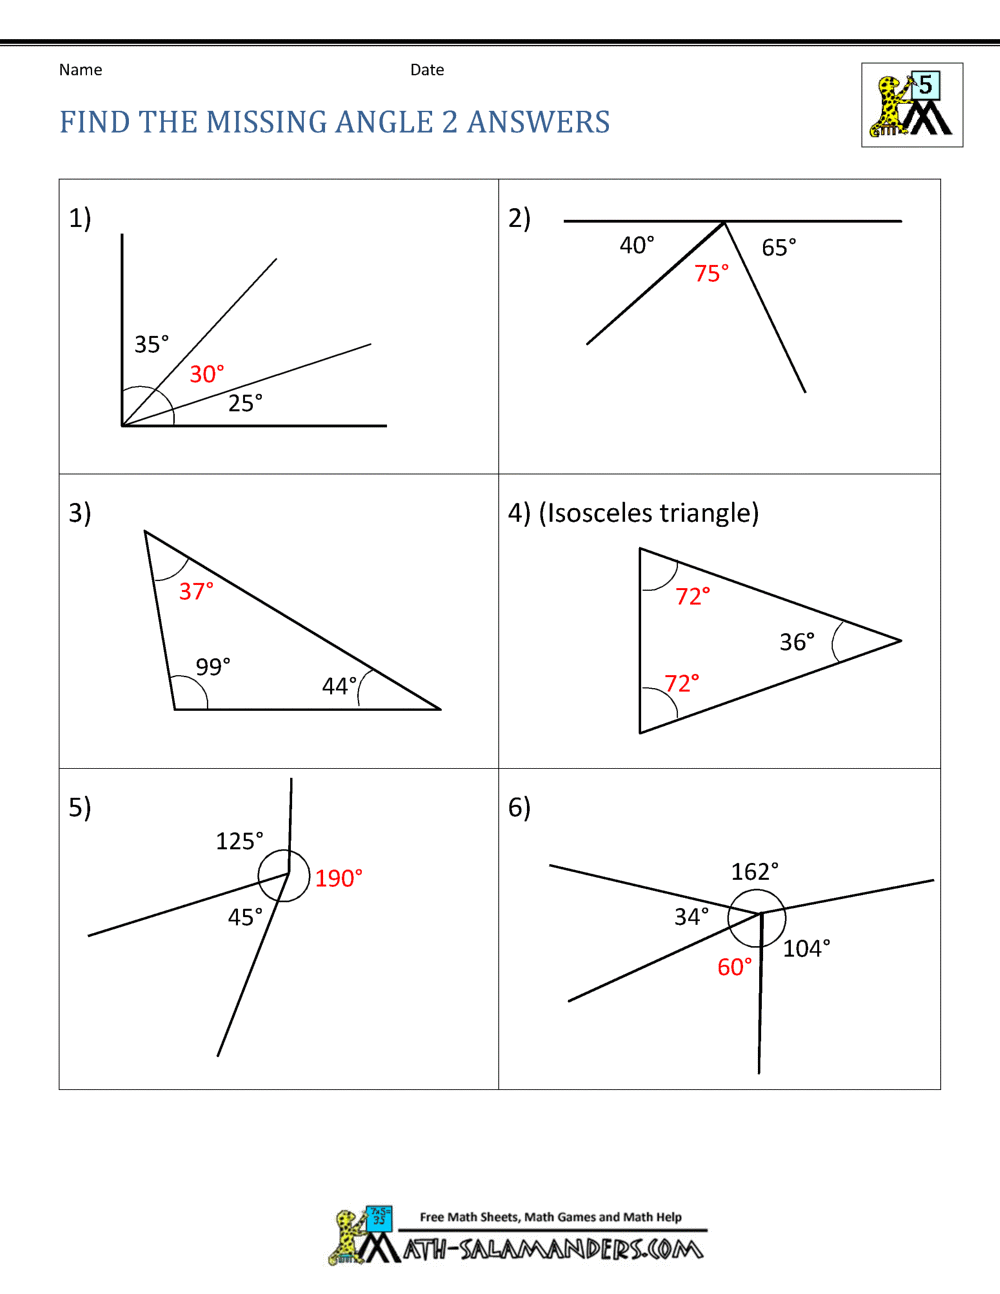 11th Grade Geometry For Find The Missing Angle Worksheet